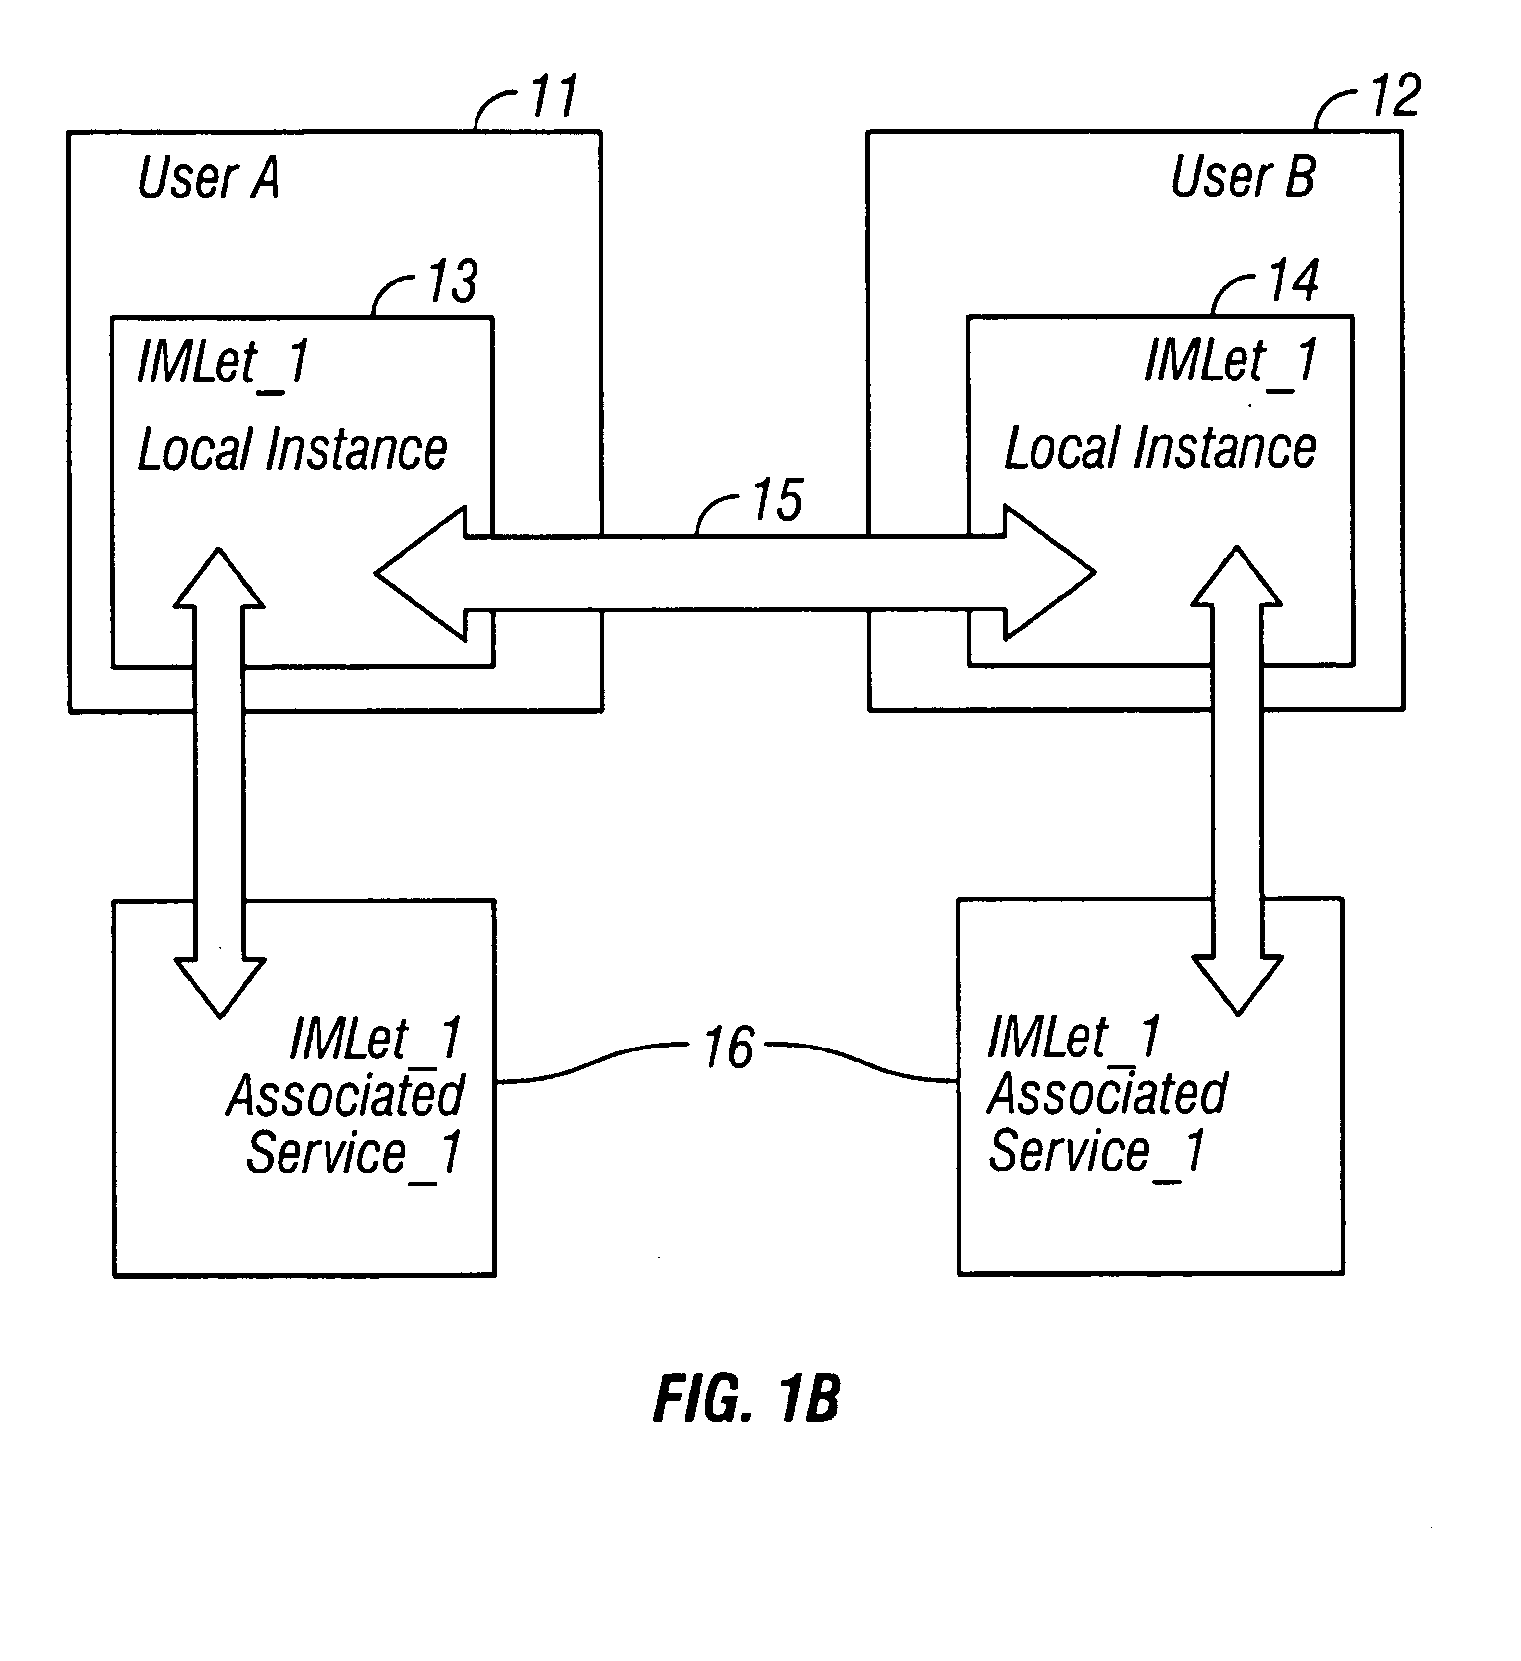 System and method for seamlessly bringing external services into instant messaging sessions and into users' authoring environment